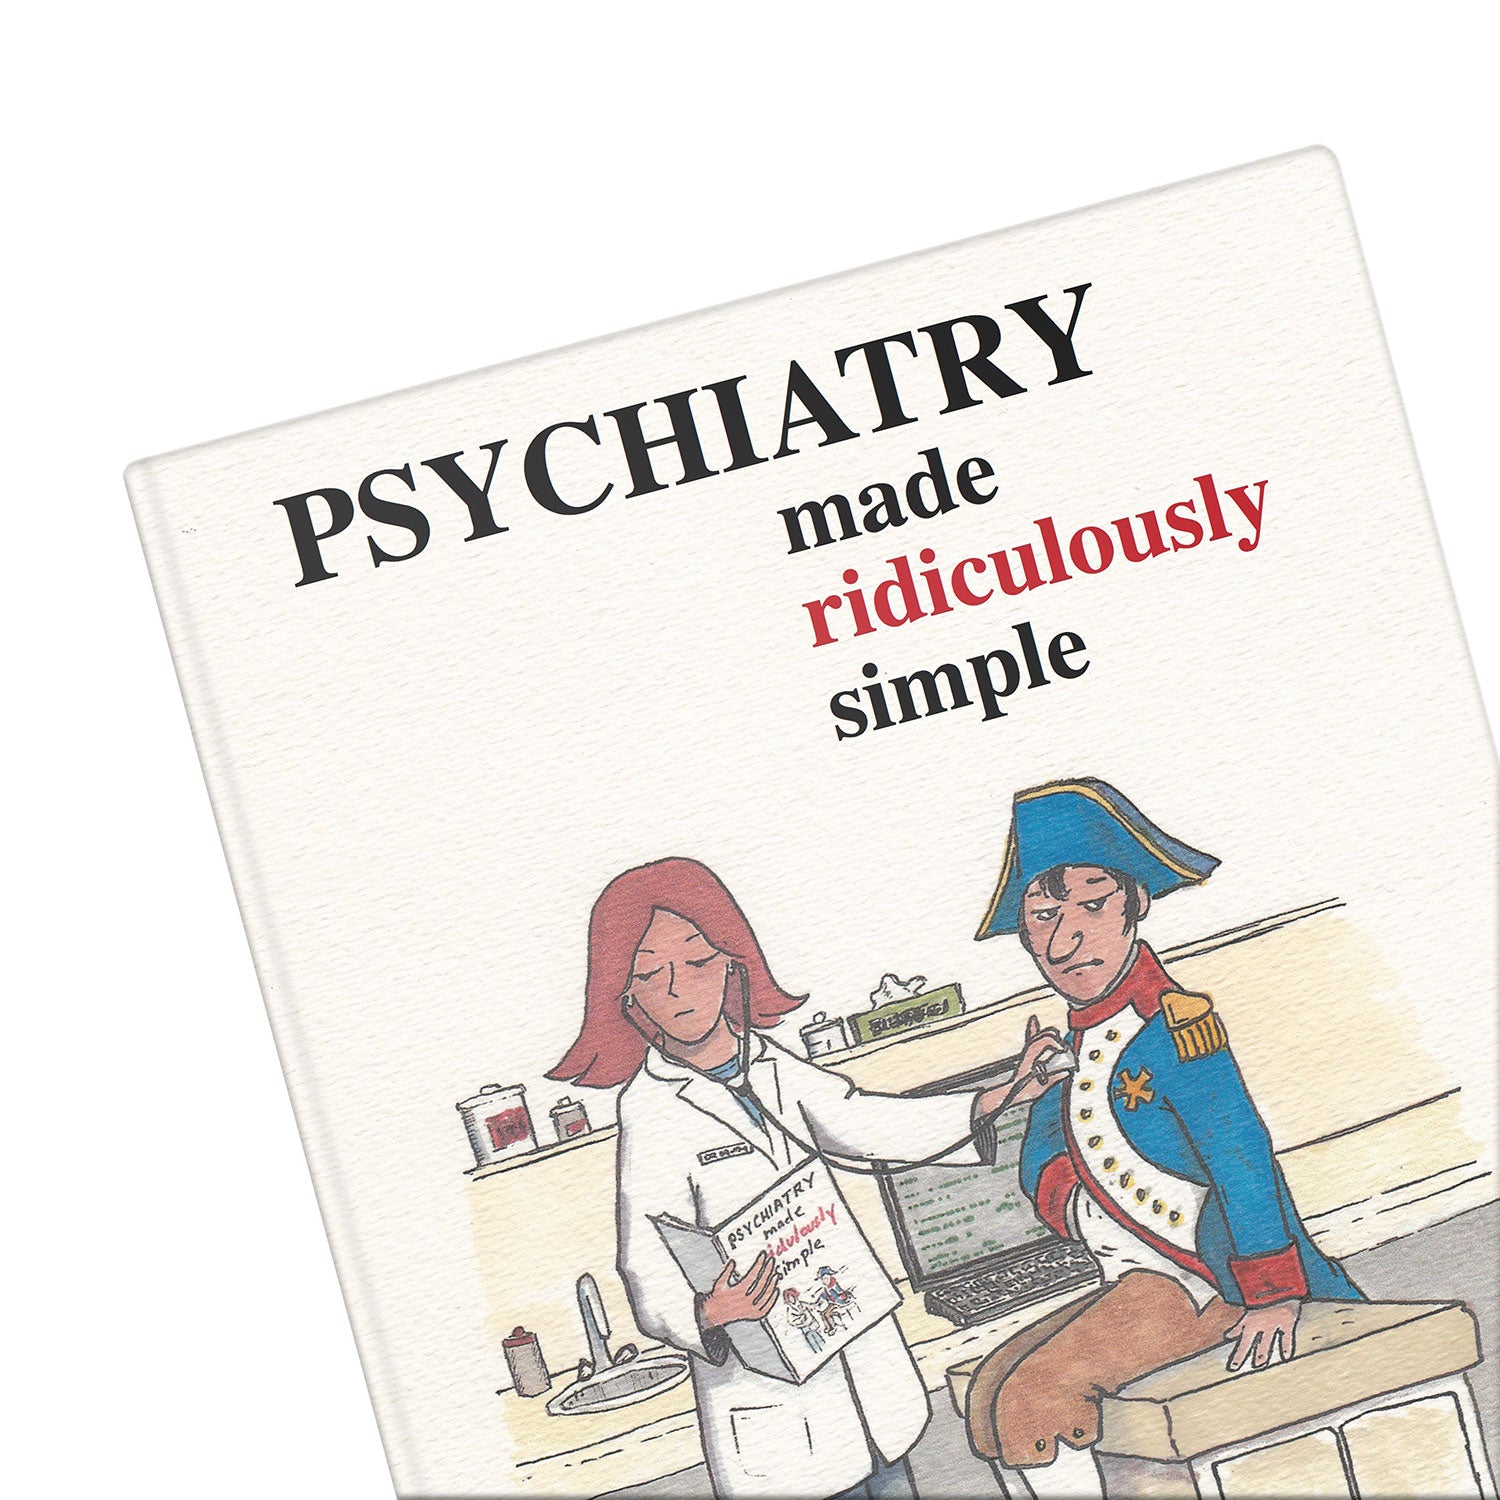 Psychiatry Made Ridiculously Simple